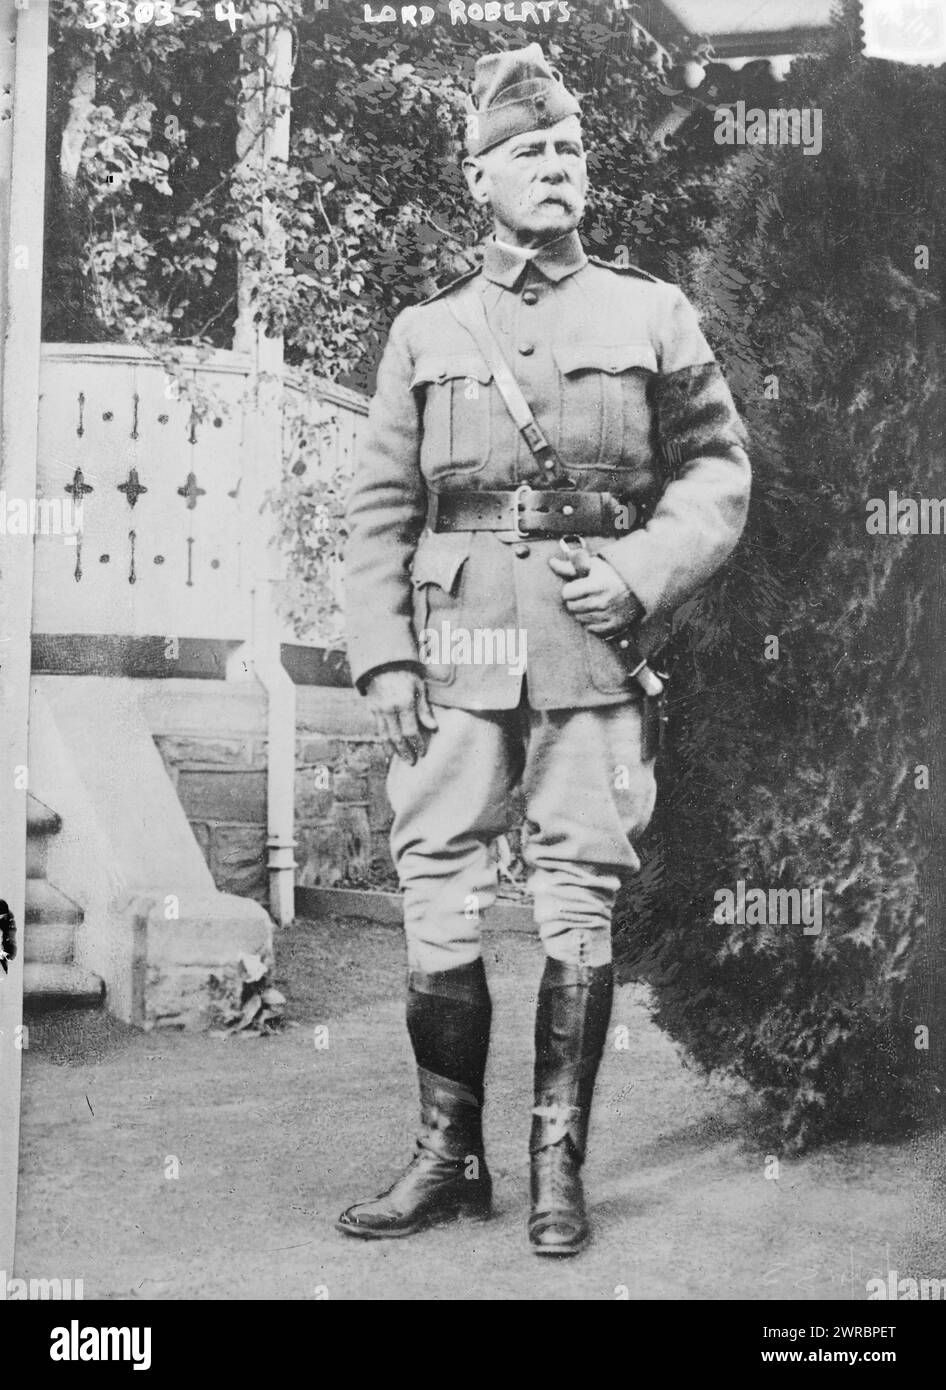 Lord Roberts, Photograph shows Field Marshal Frederick Sleigh Roberts, 1st Earl Roberts (1832-1914), a British officer who died in 1914 during a visit to troops in France during World War I., 1914, Glass negatives, 1 negative: glass Stock Photo